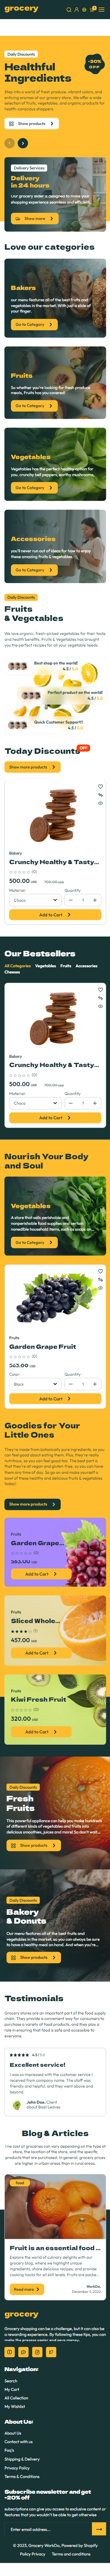 Grocery Theme Add-on for eCommerceGo - WorkDo